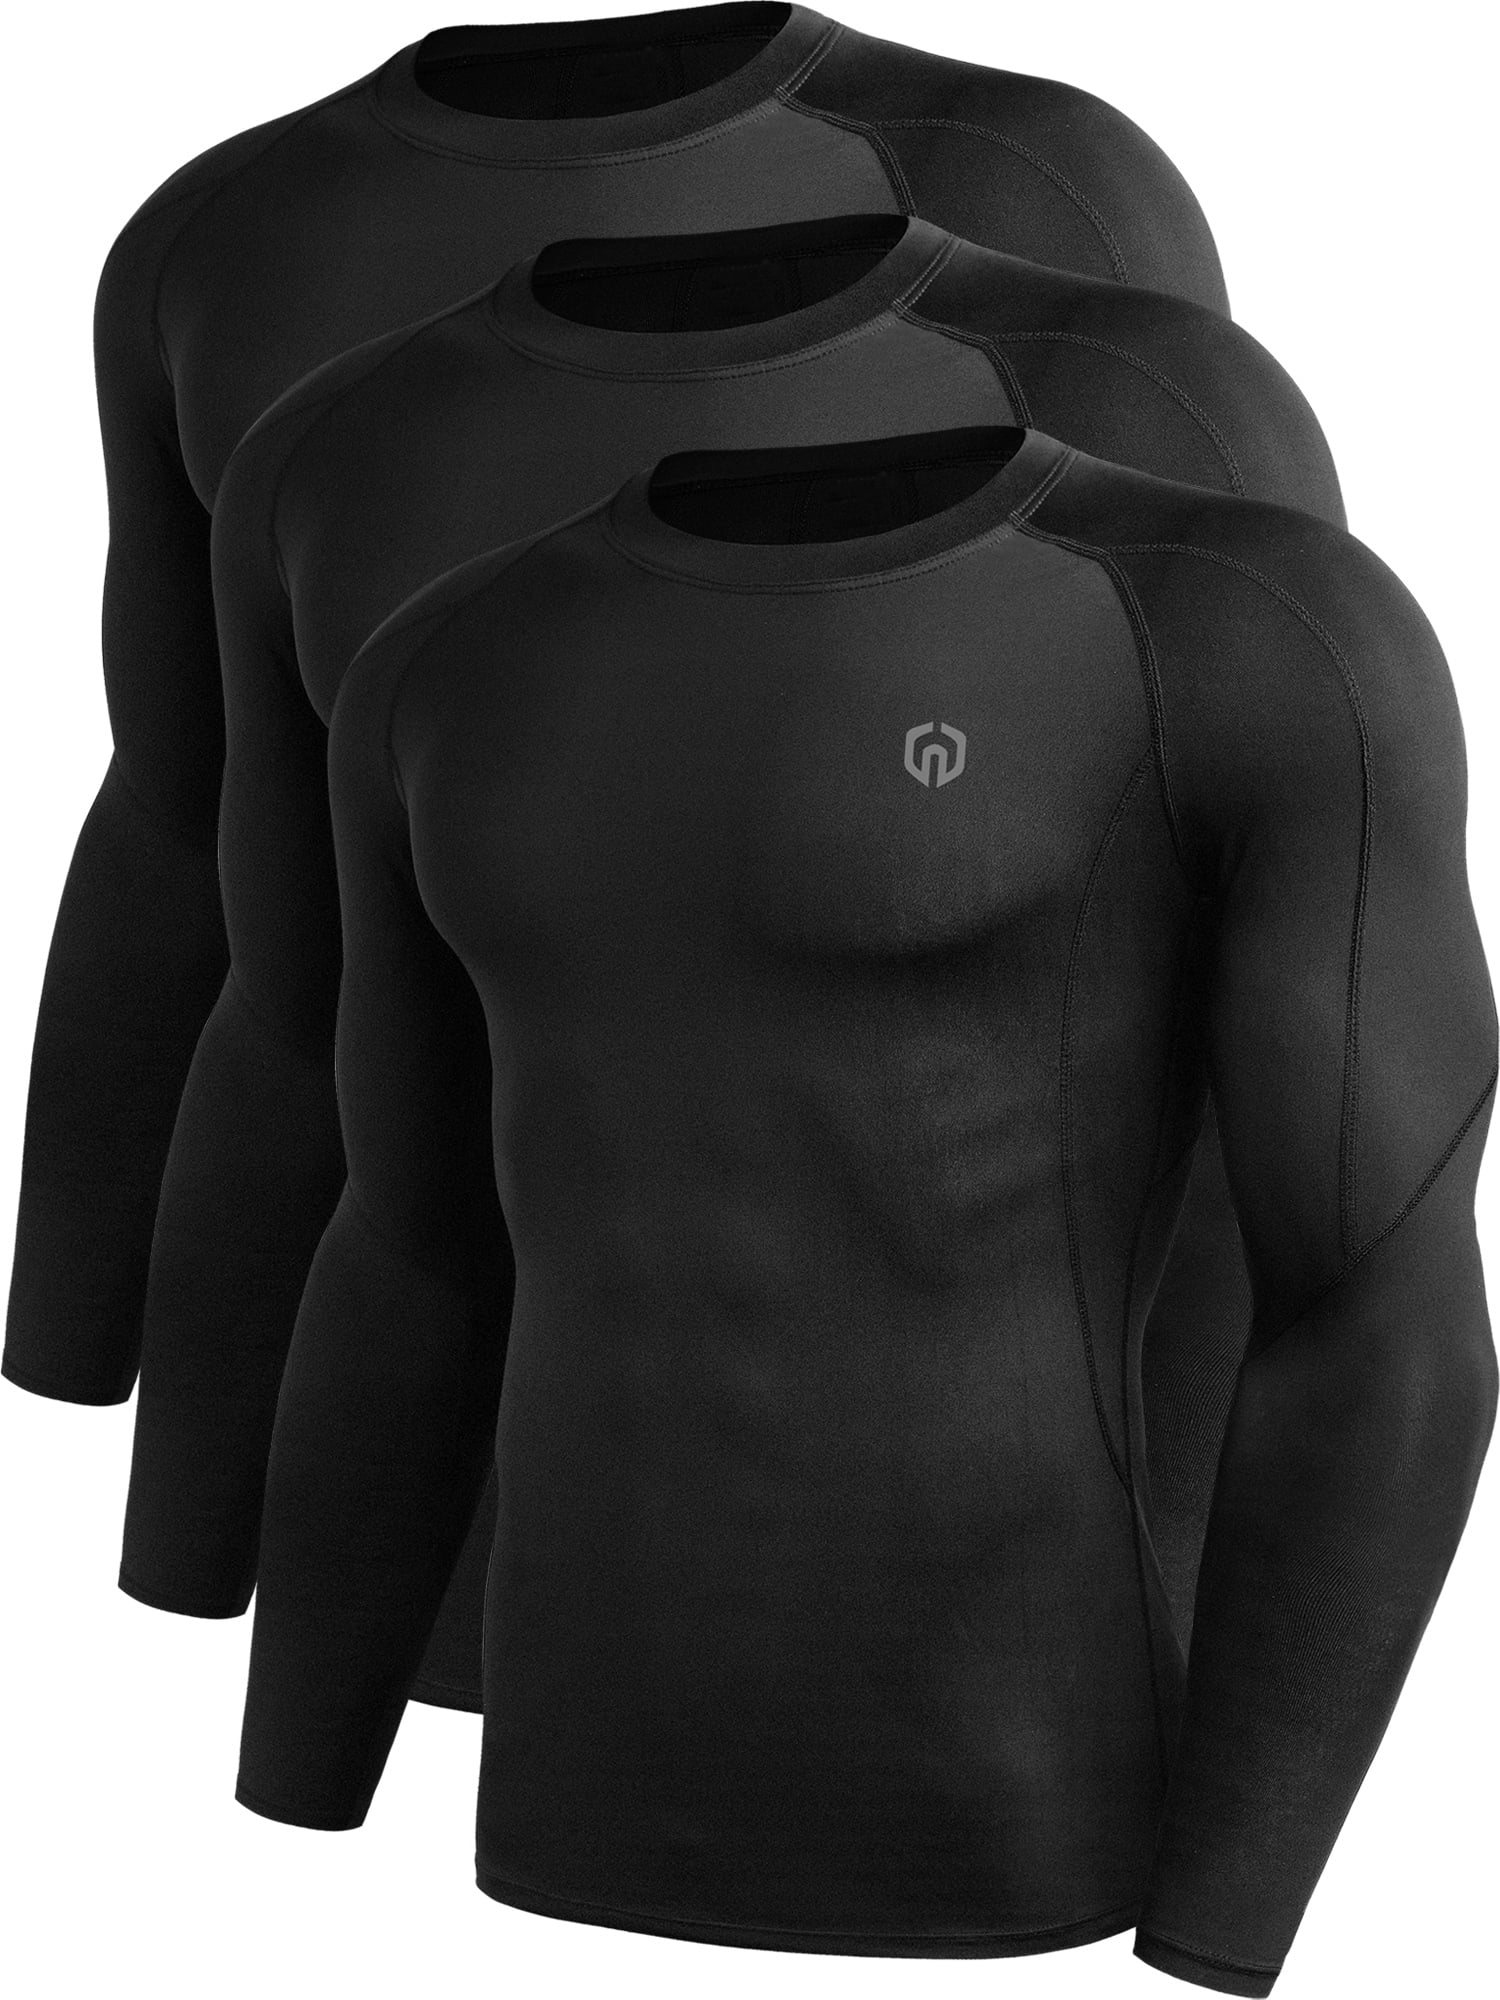 NELEUS Men Dry Fit Long Sleeve Compression Shirts Workout Running